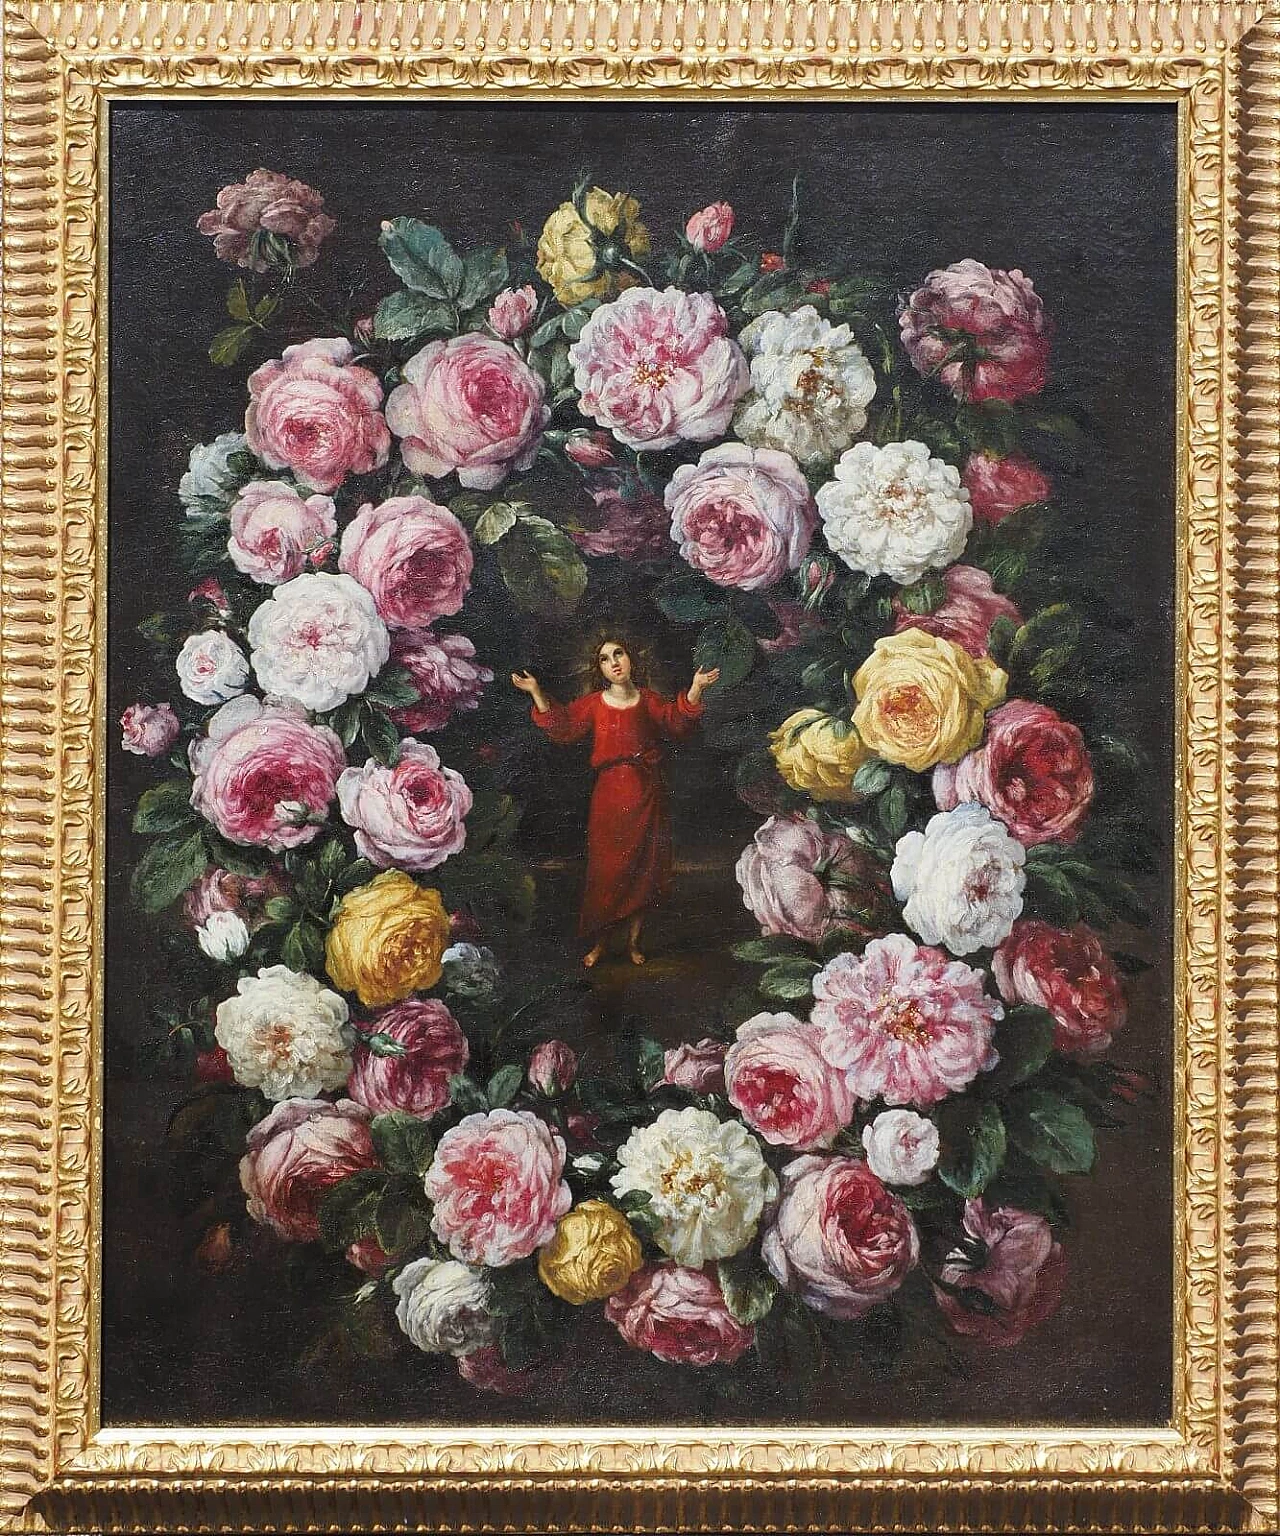 Flower garland with Young Jesus, oil painting on canvas attributed to Pier Francesco Cittadini, 17th century 1